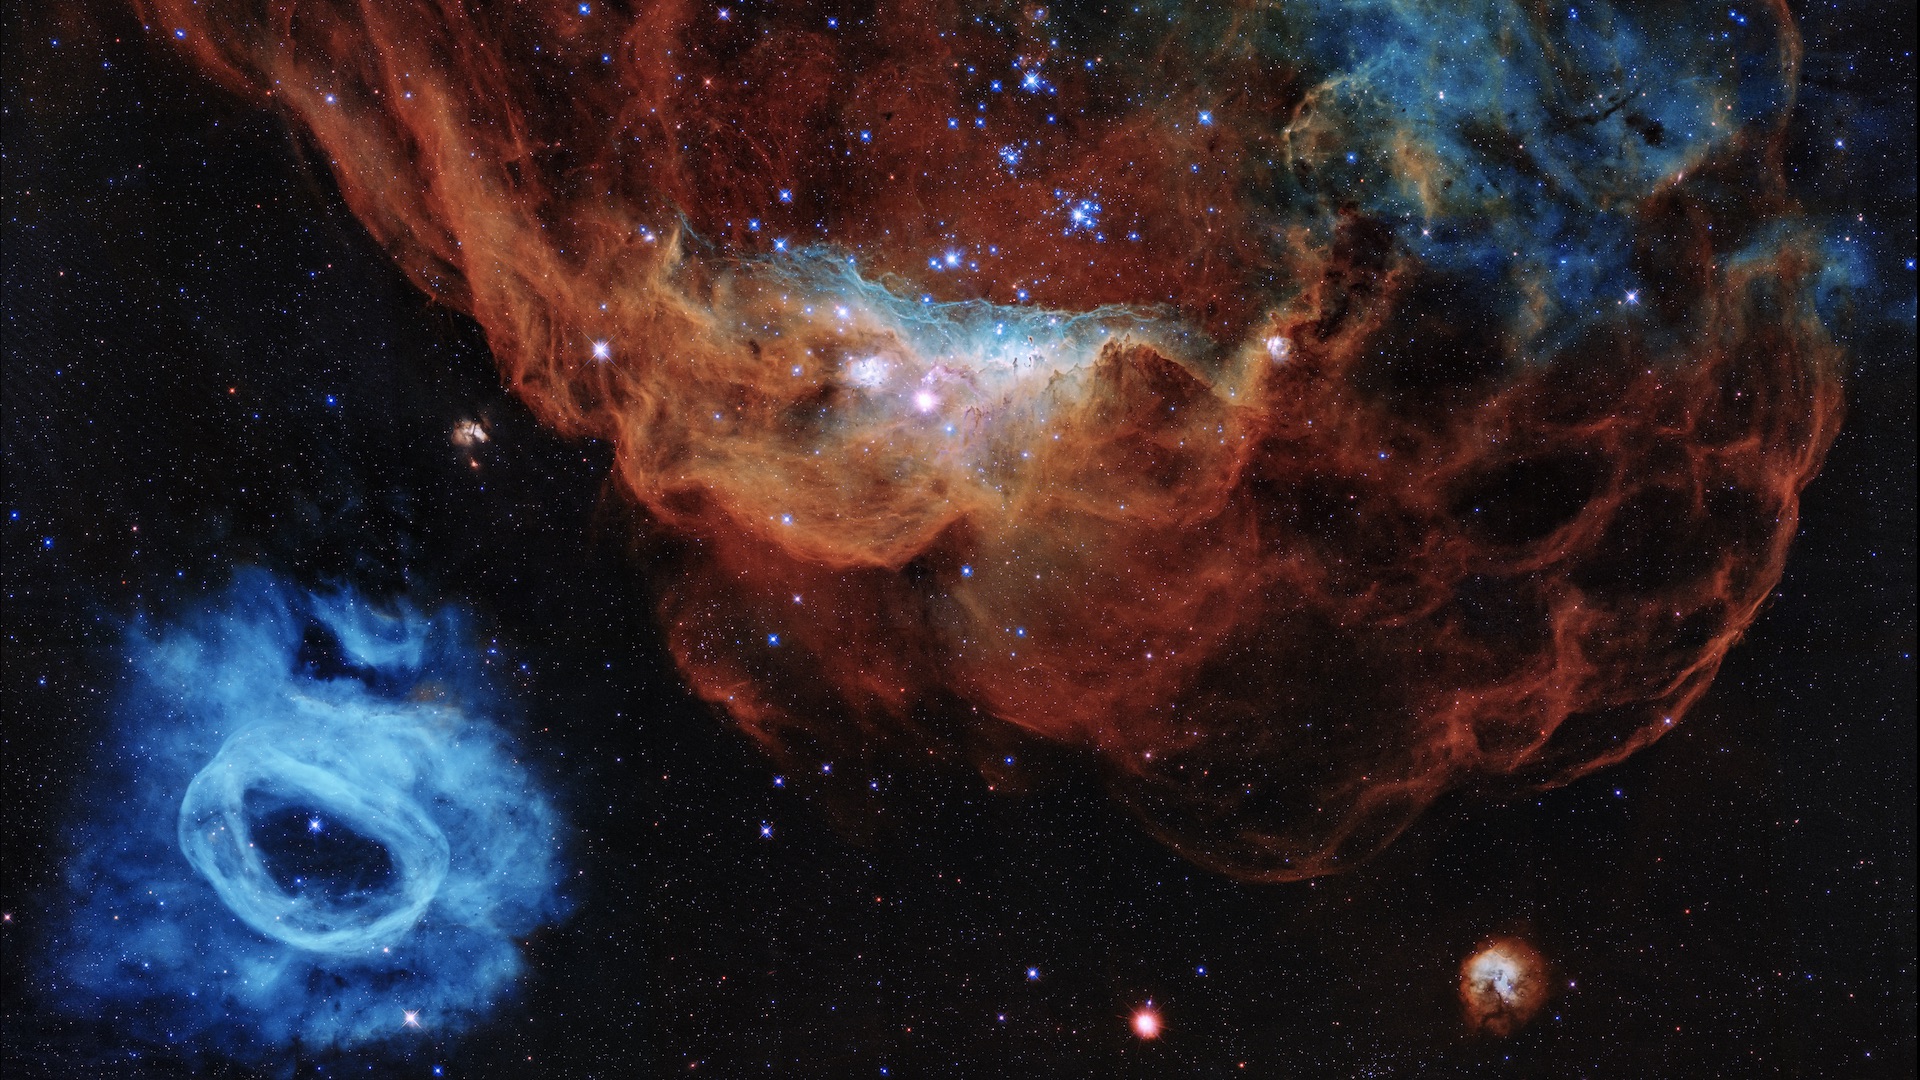 Preview Image for Hubble’s 30th Anniversary Image